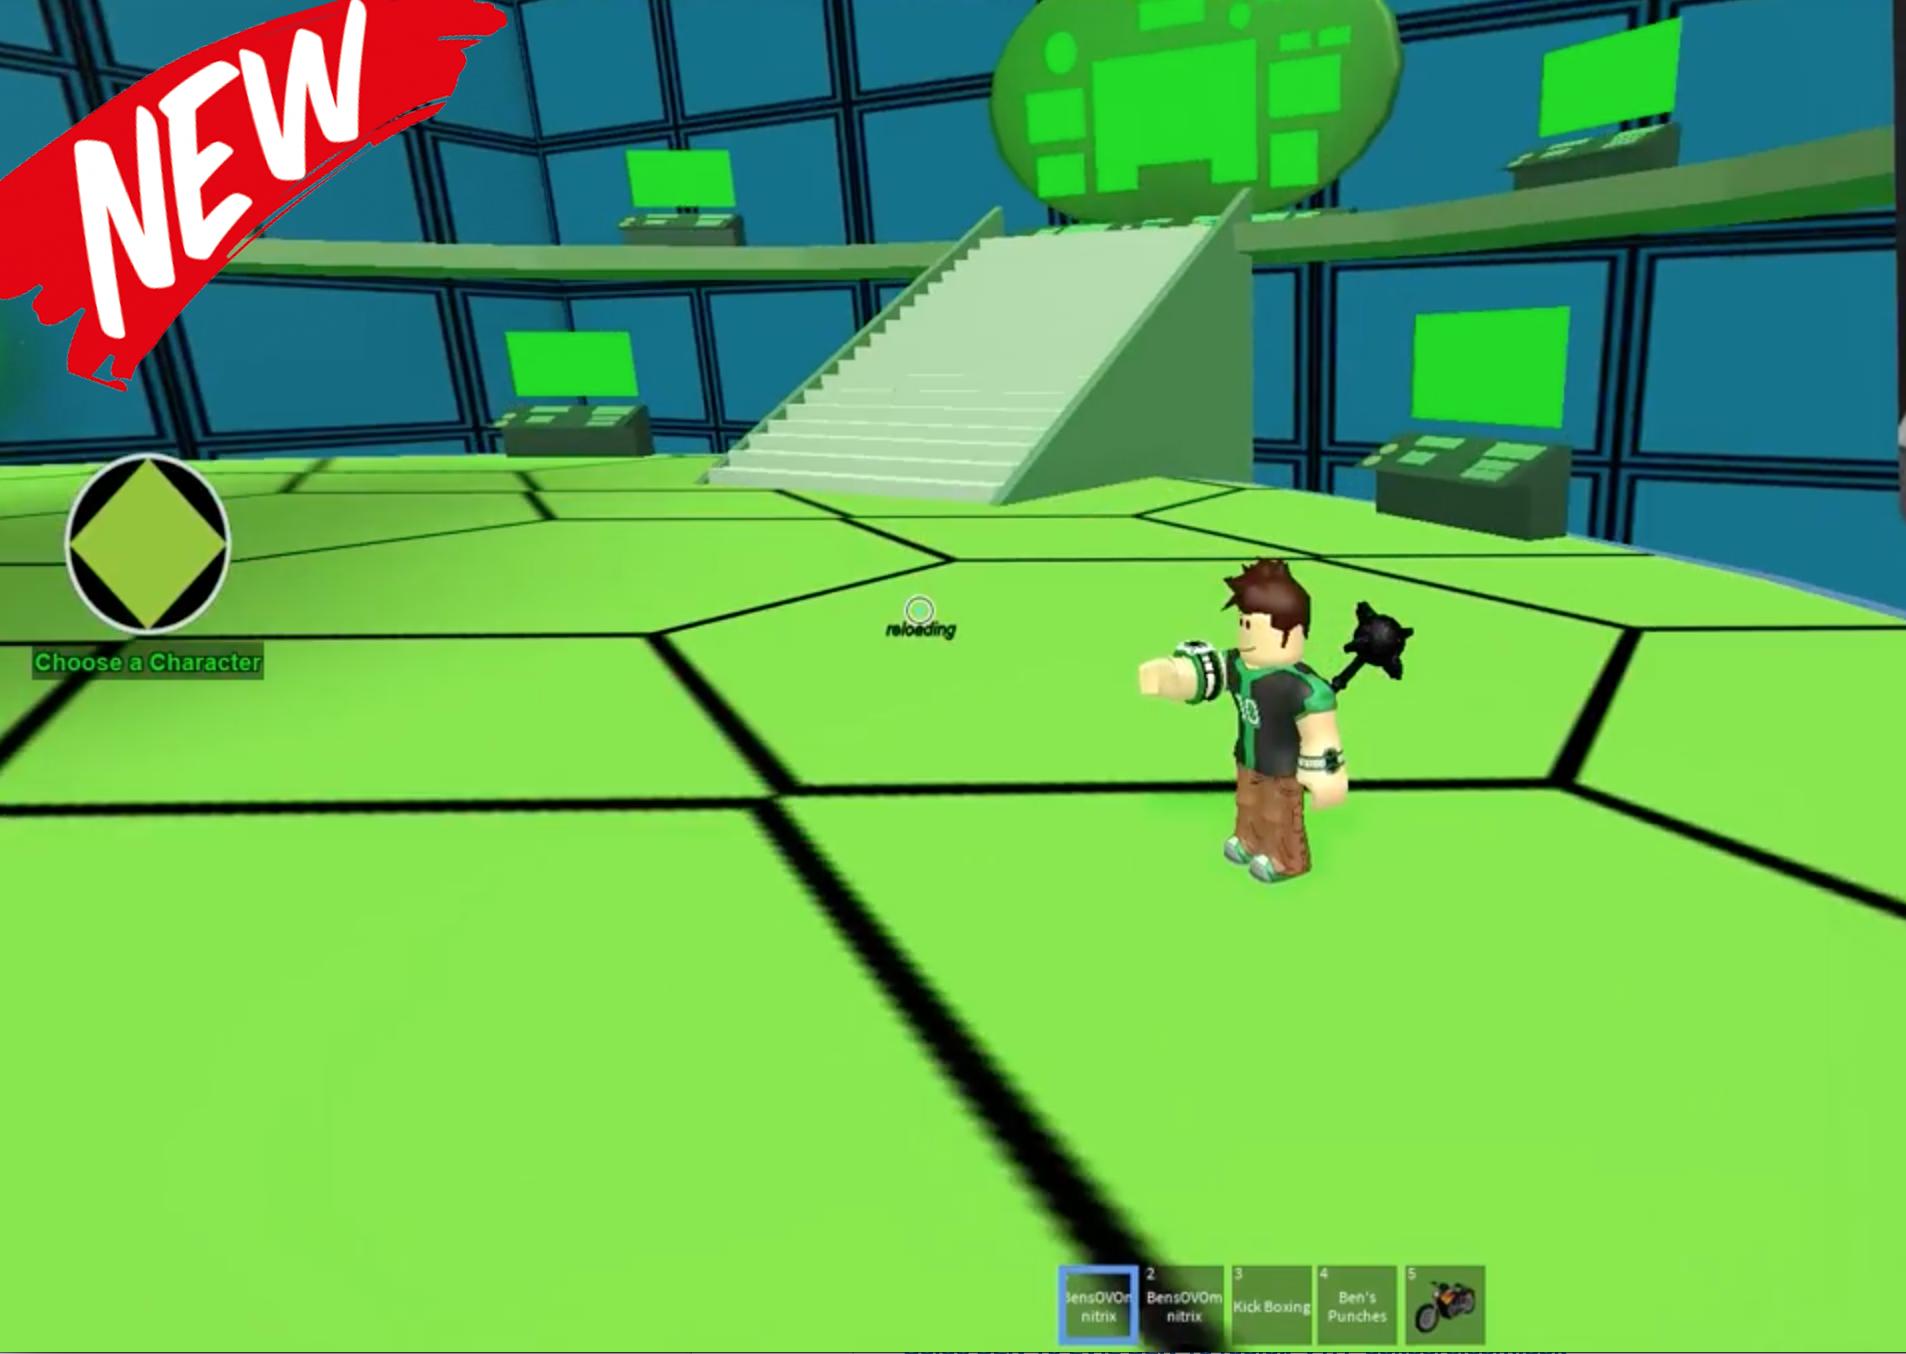 Guide For Ben 10 Evil Ben 10 Roblox Pro For Android Apk Download - tips for ben 10 evil ben 10 roblox apkonline